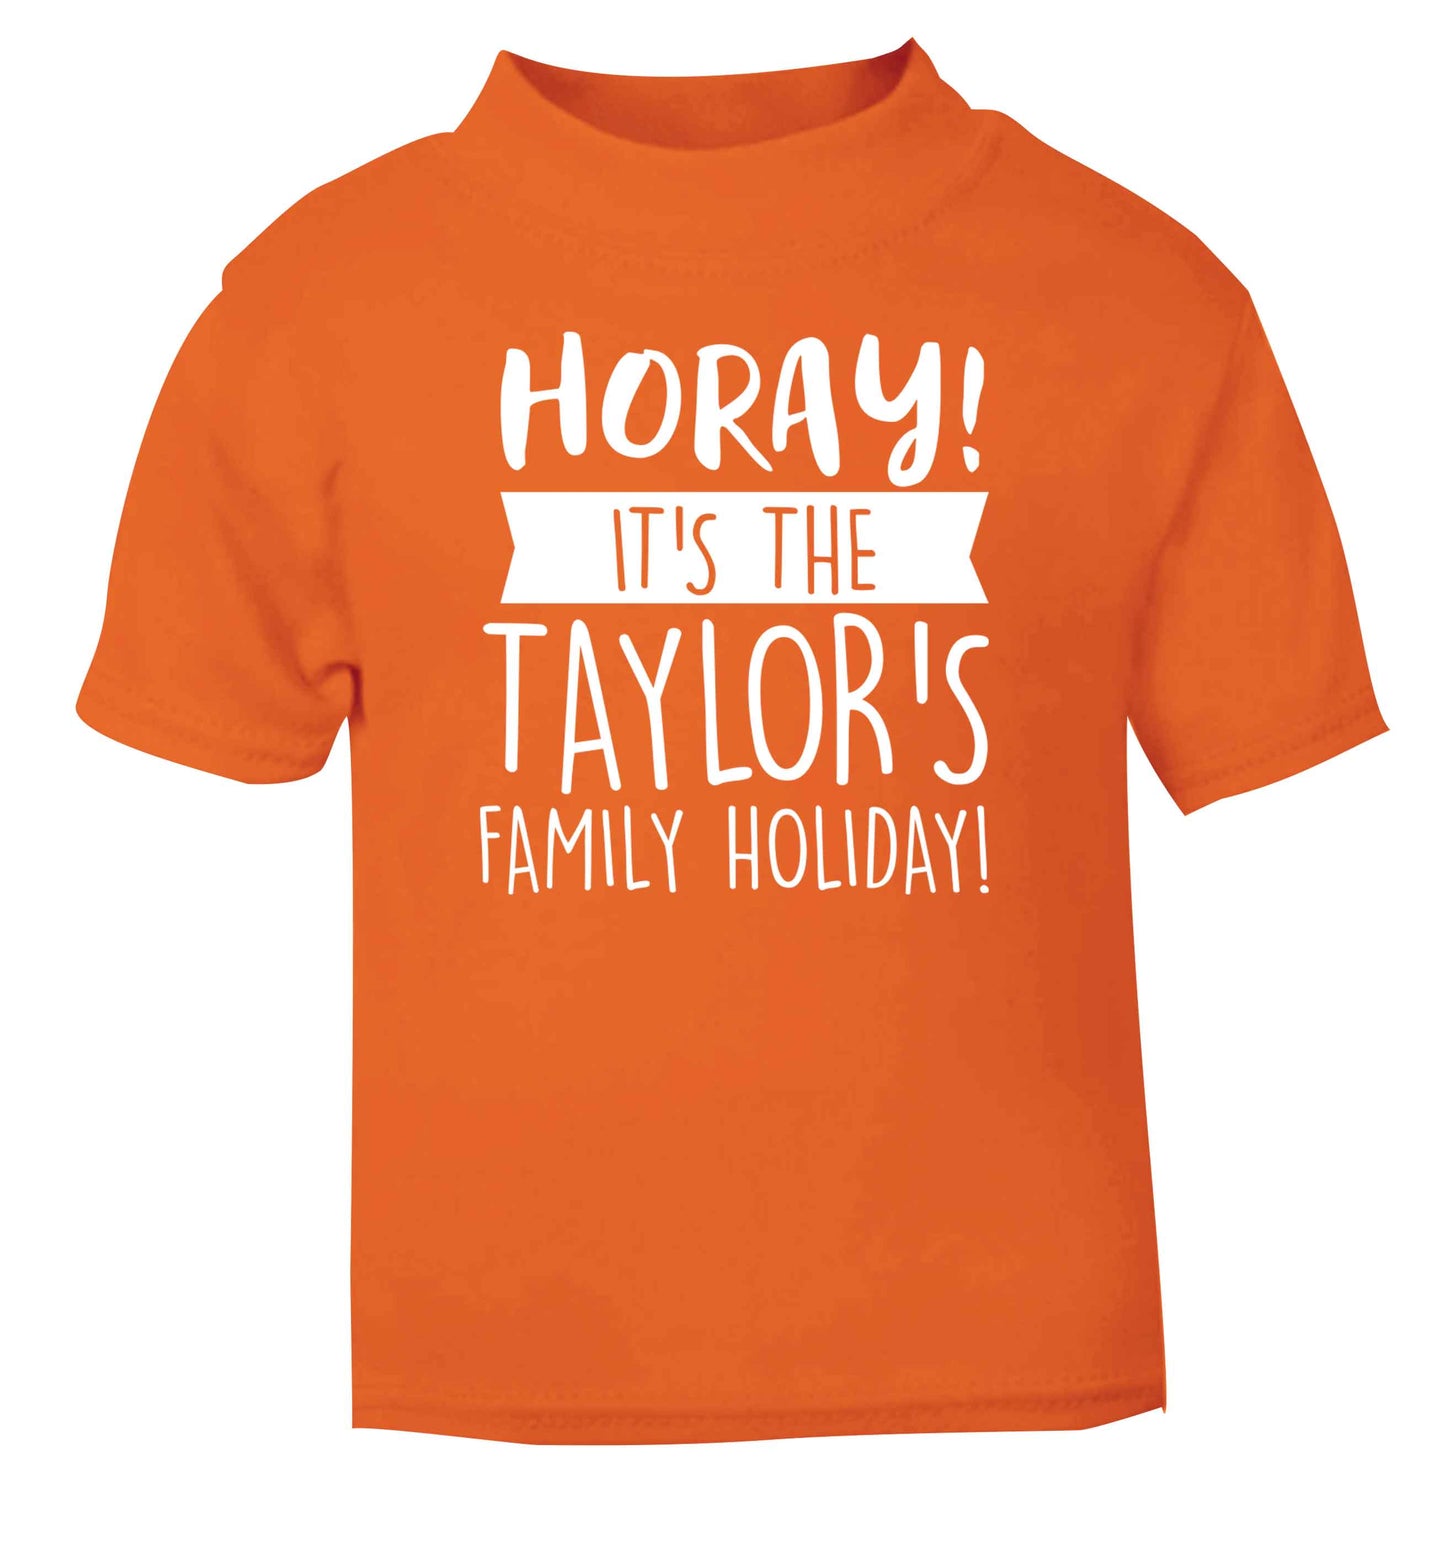 Horay it's the Taylor's family holiday! personalised item orange Baby Toddler Tshirt 2 Years